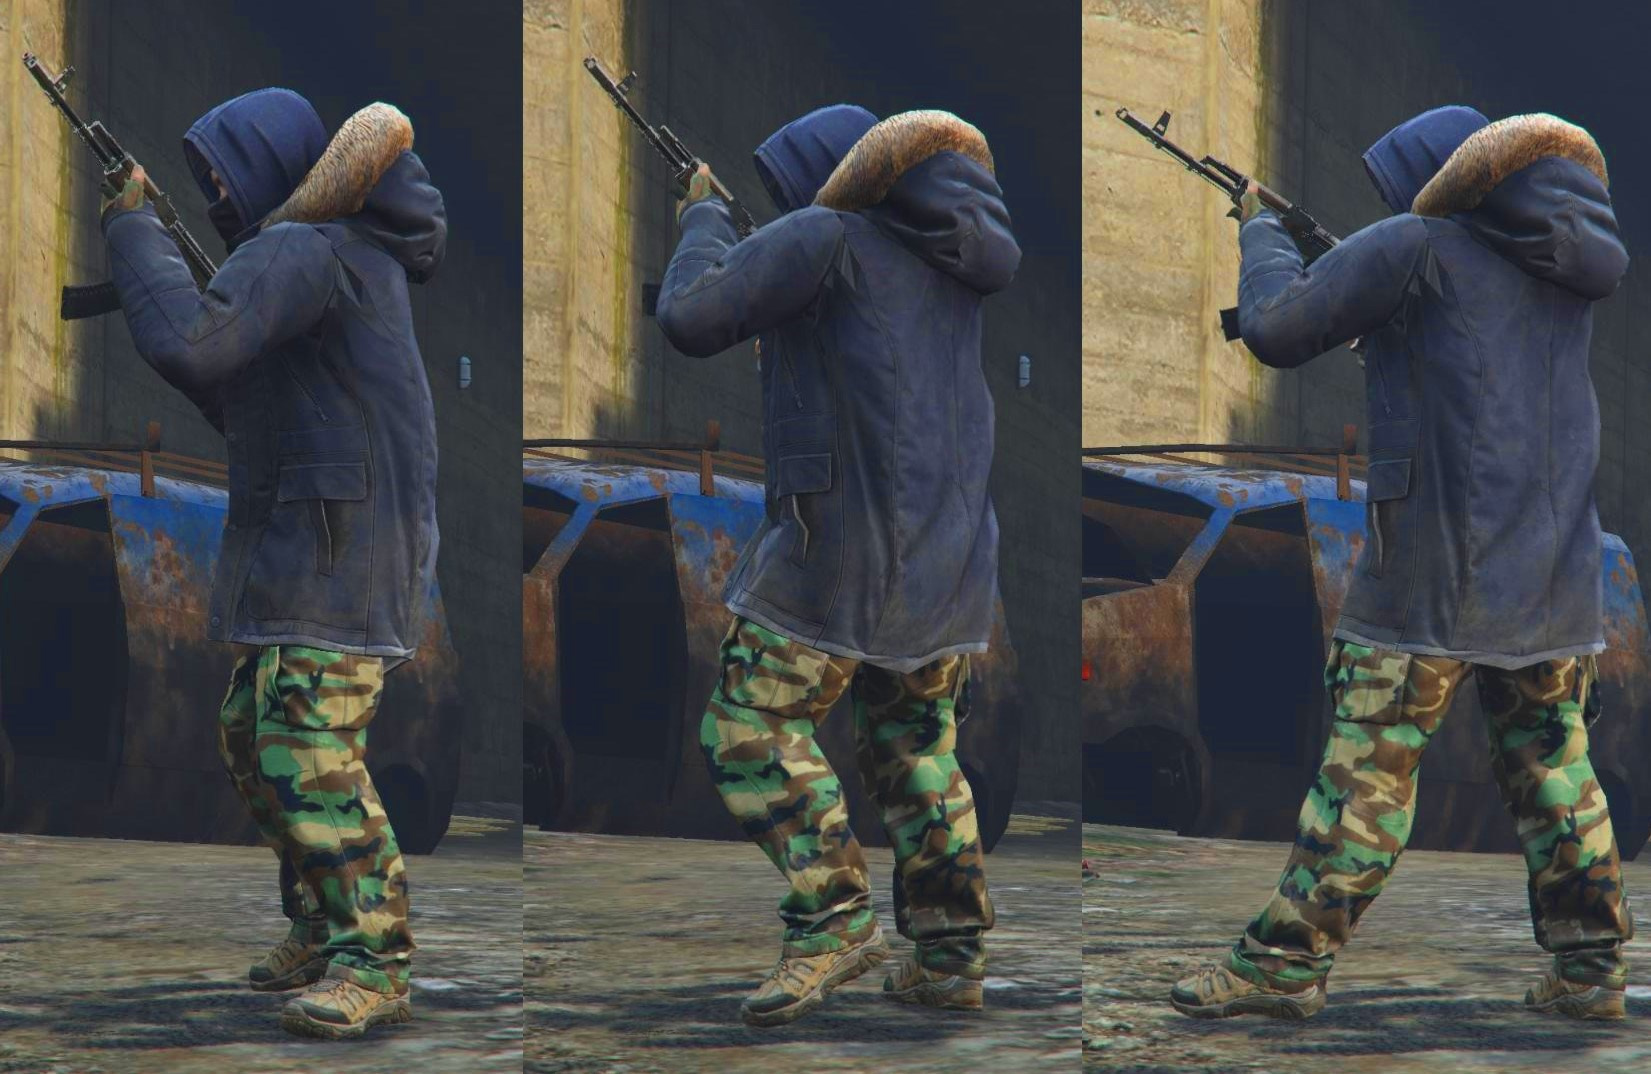 Full body Arctic suit from Rust for MP Male 